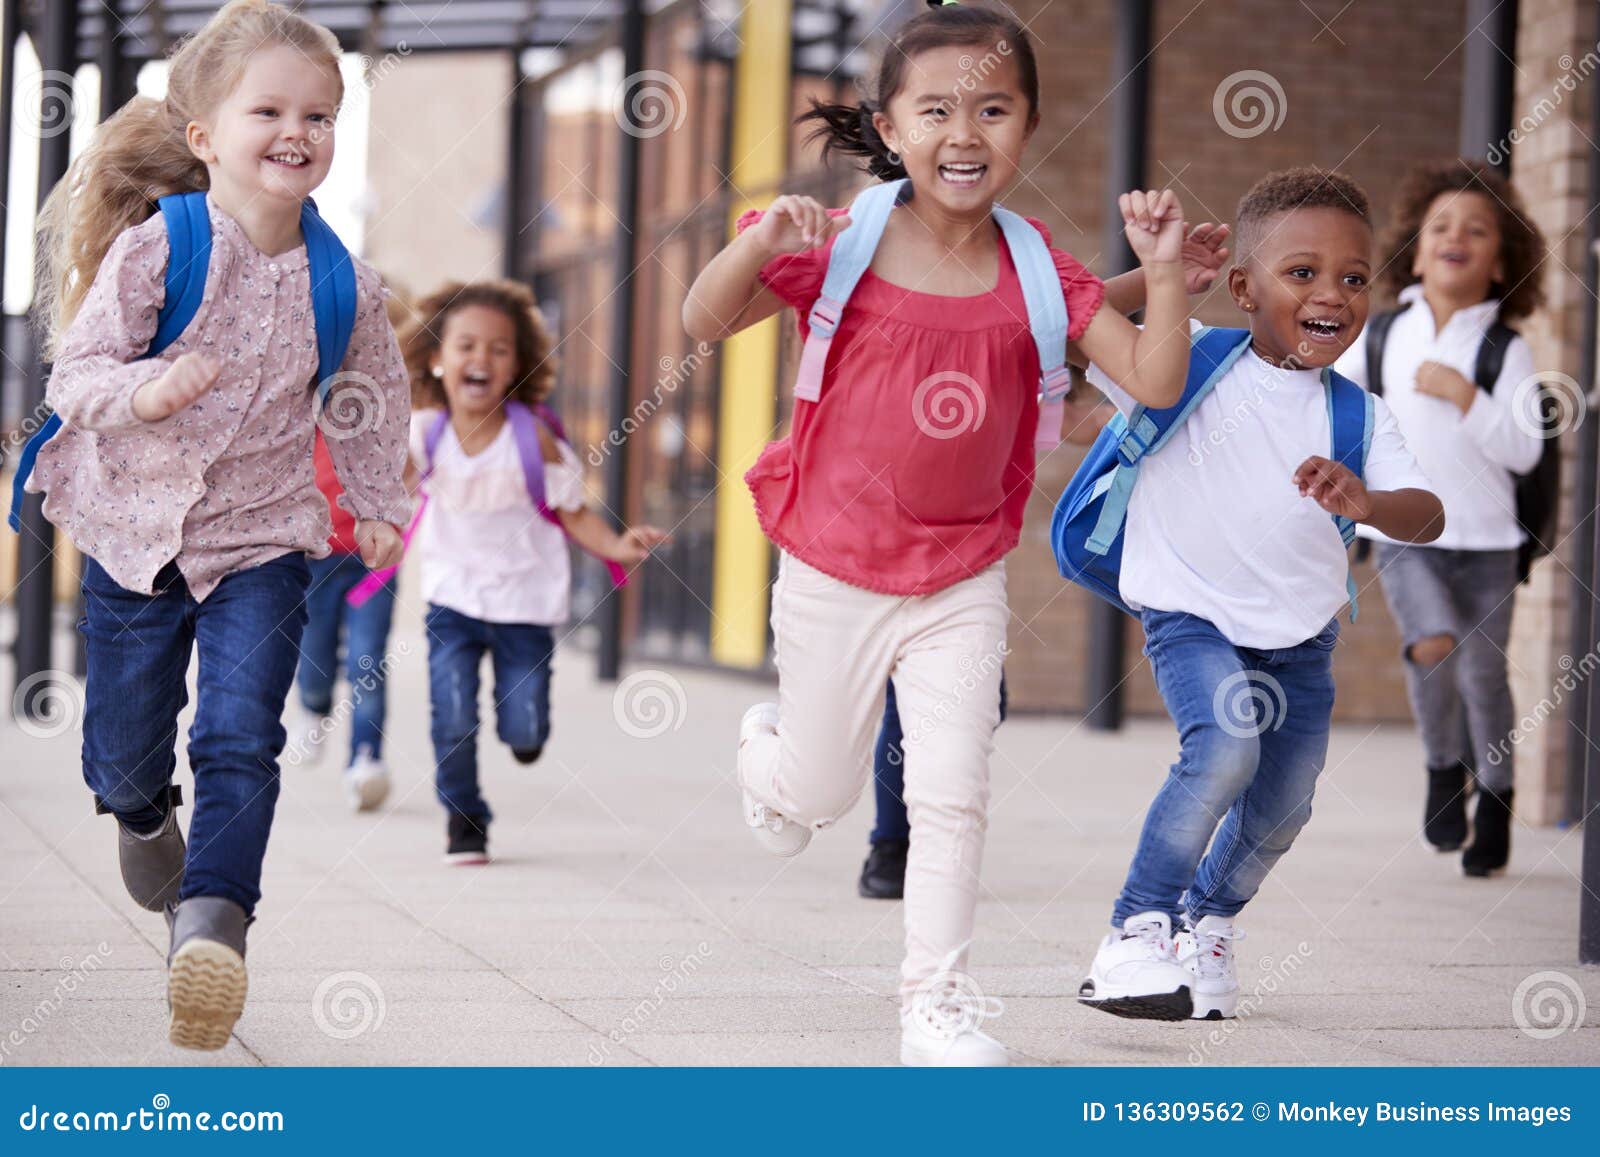 A Group of Smiling Multi-ethnic School Kids Running in a Walkway